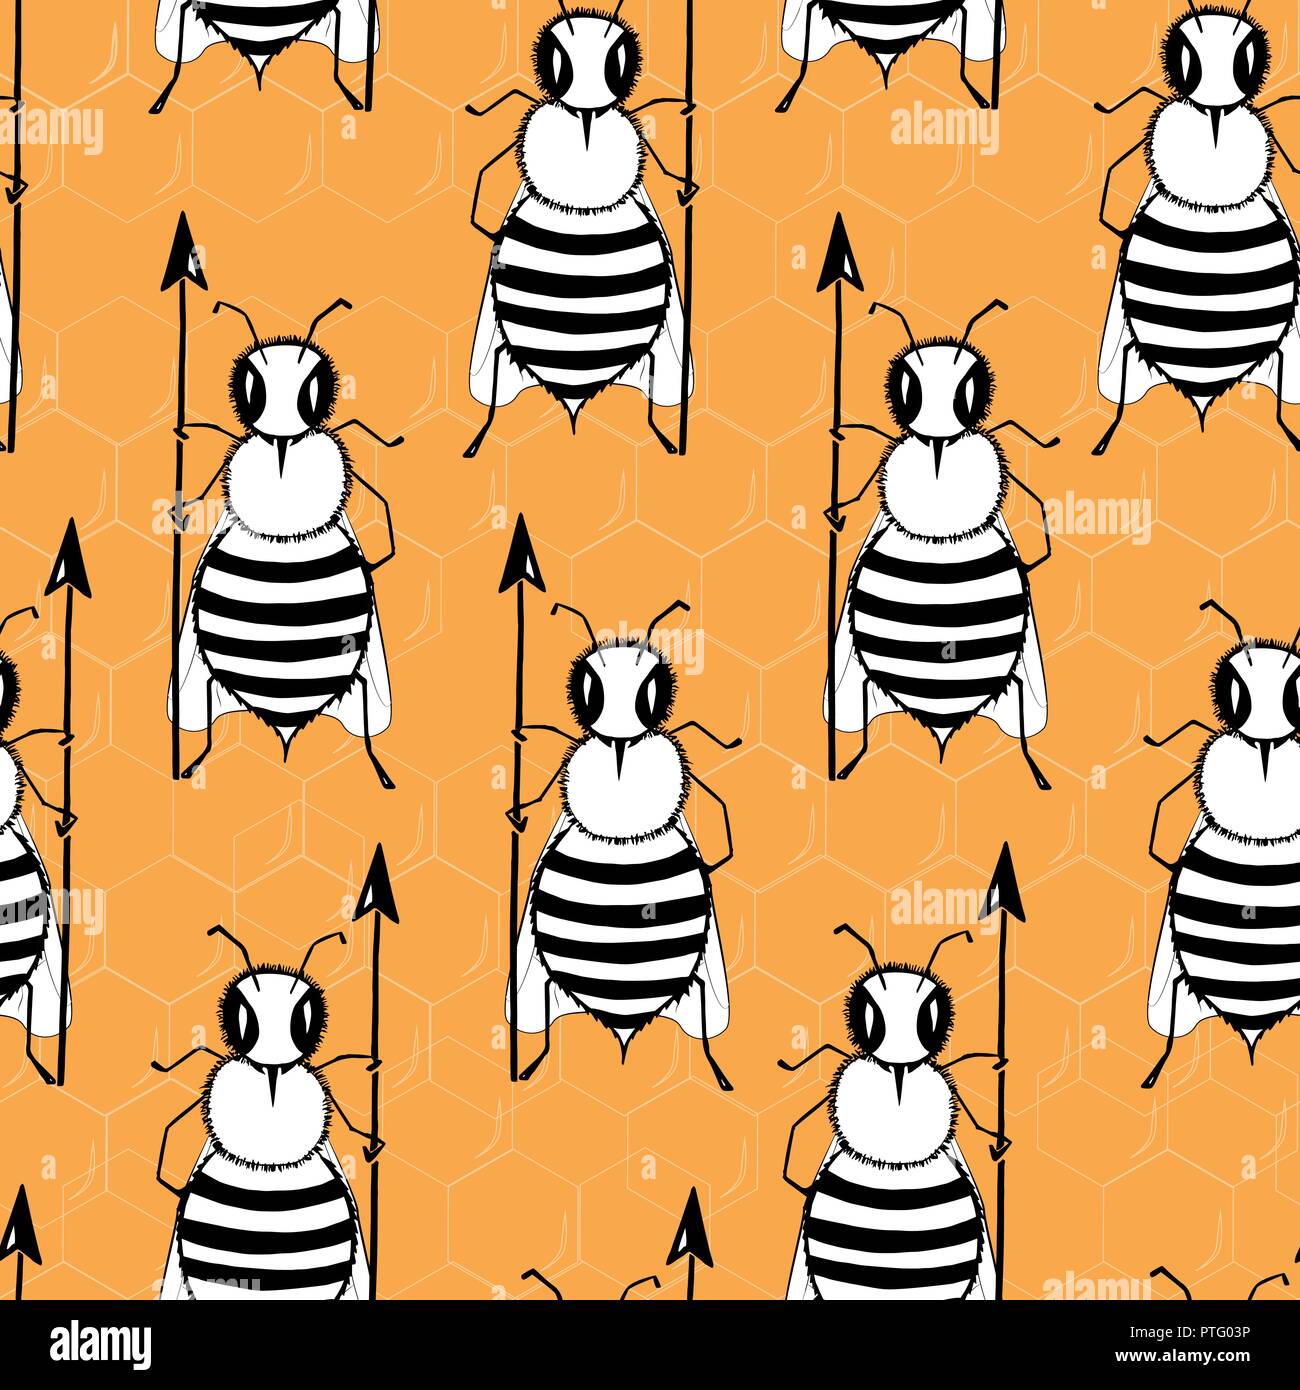 Seamless pattern with angry killer bees on the orange background. Soldier bee with pike. Killer bees army. Vector Stock Vector